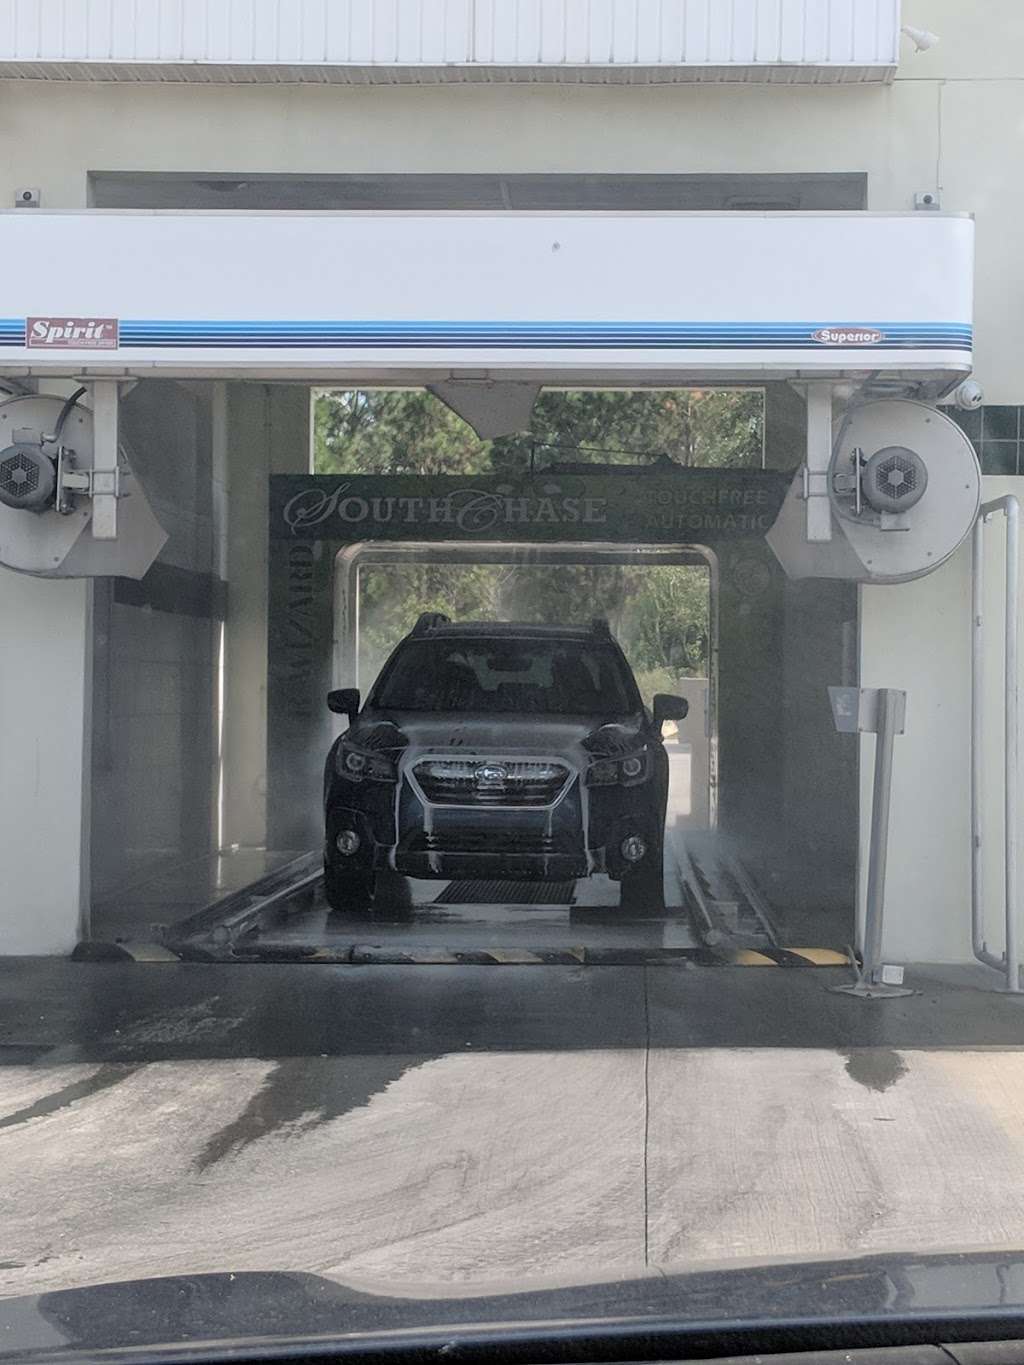 South Chase Carwash | 100 E Wetherbee Rd, Orlando, FL 32824 | Phone: (407) 851-9022